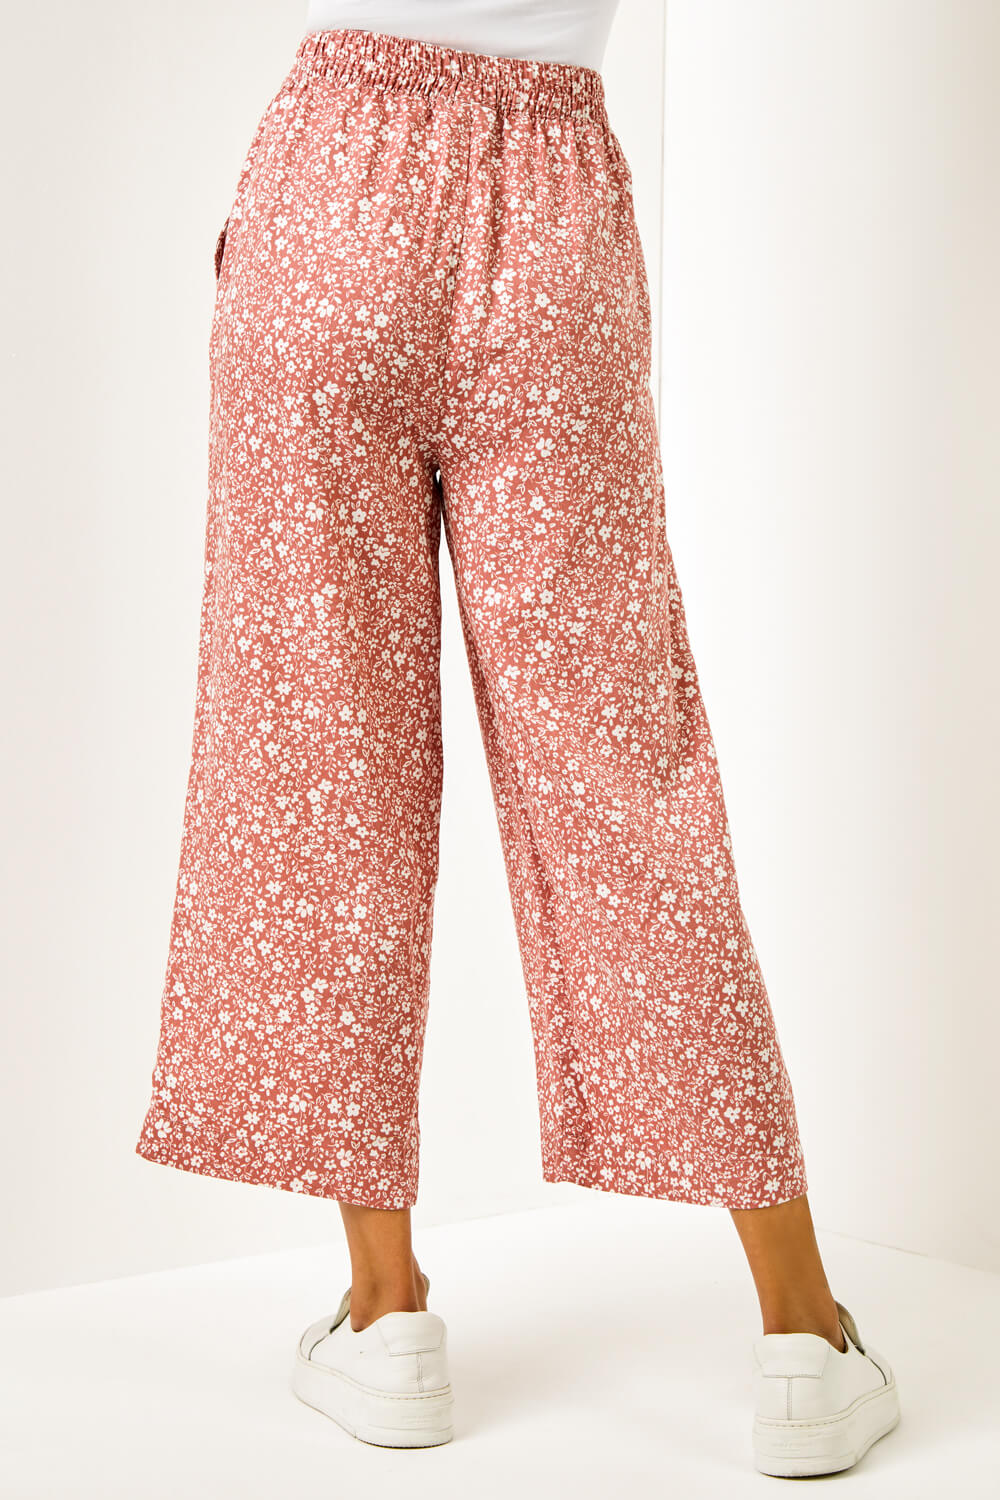 Rust Ditsy Floral Elastic Tie Waist Cropped Culottes, Image 5 of 5